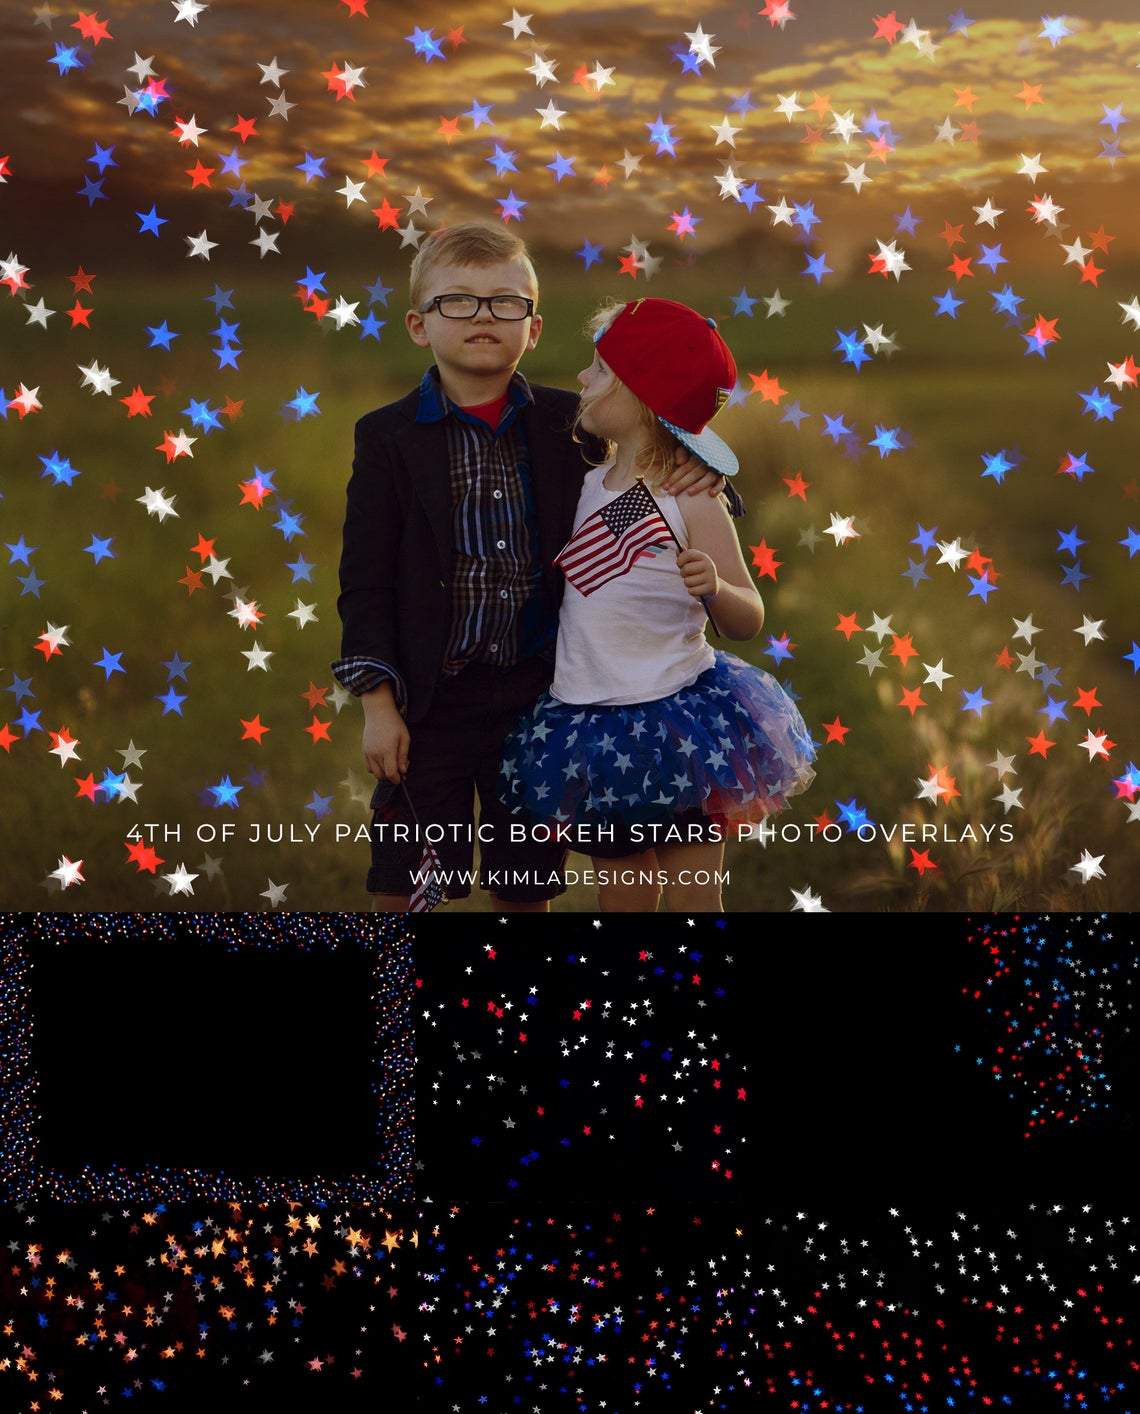 4th of July Bundle Offer Photo Overlays